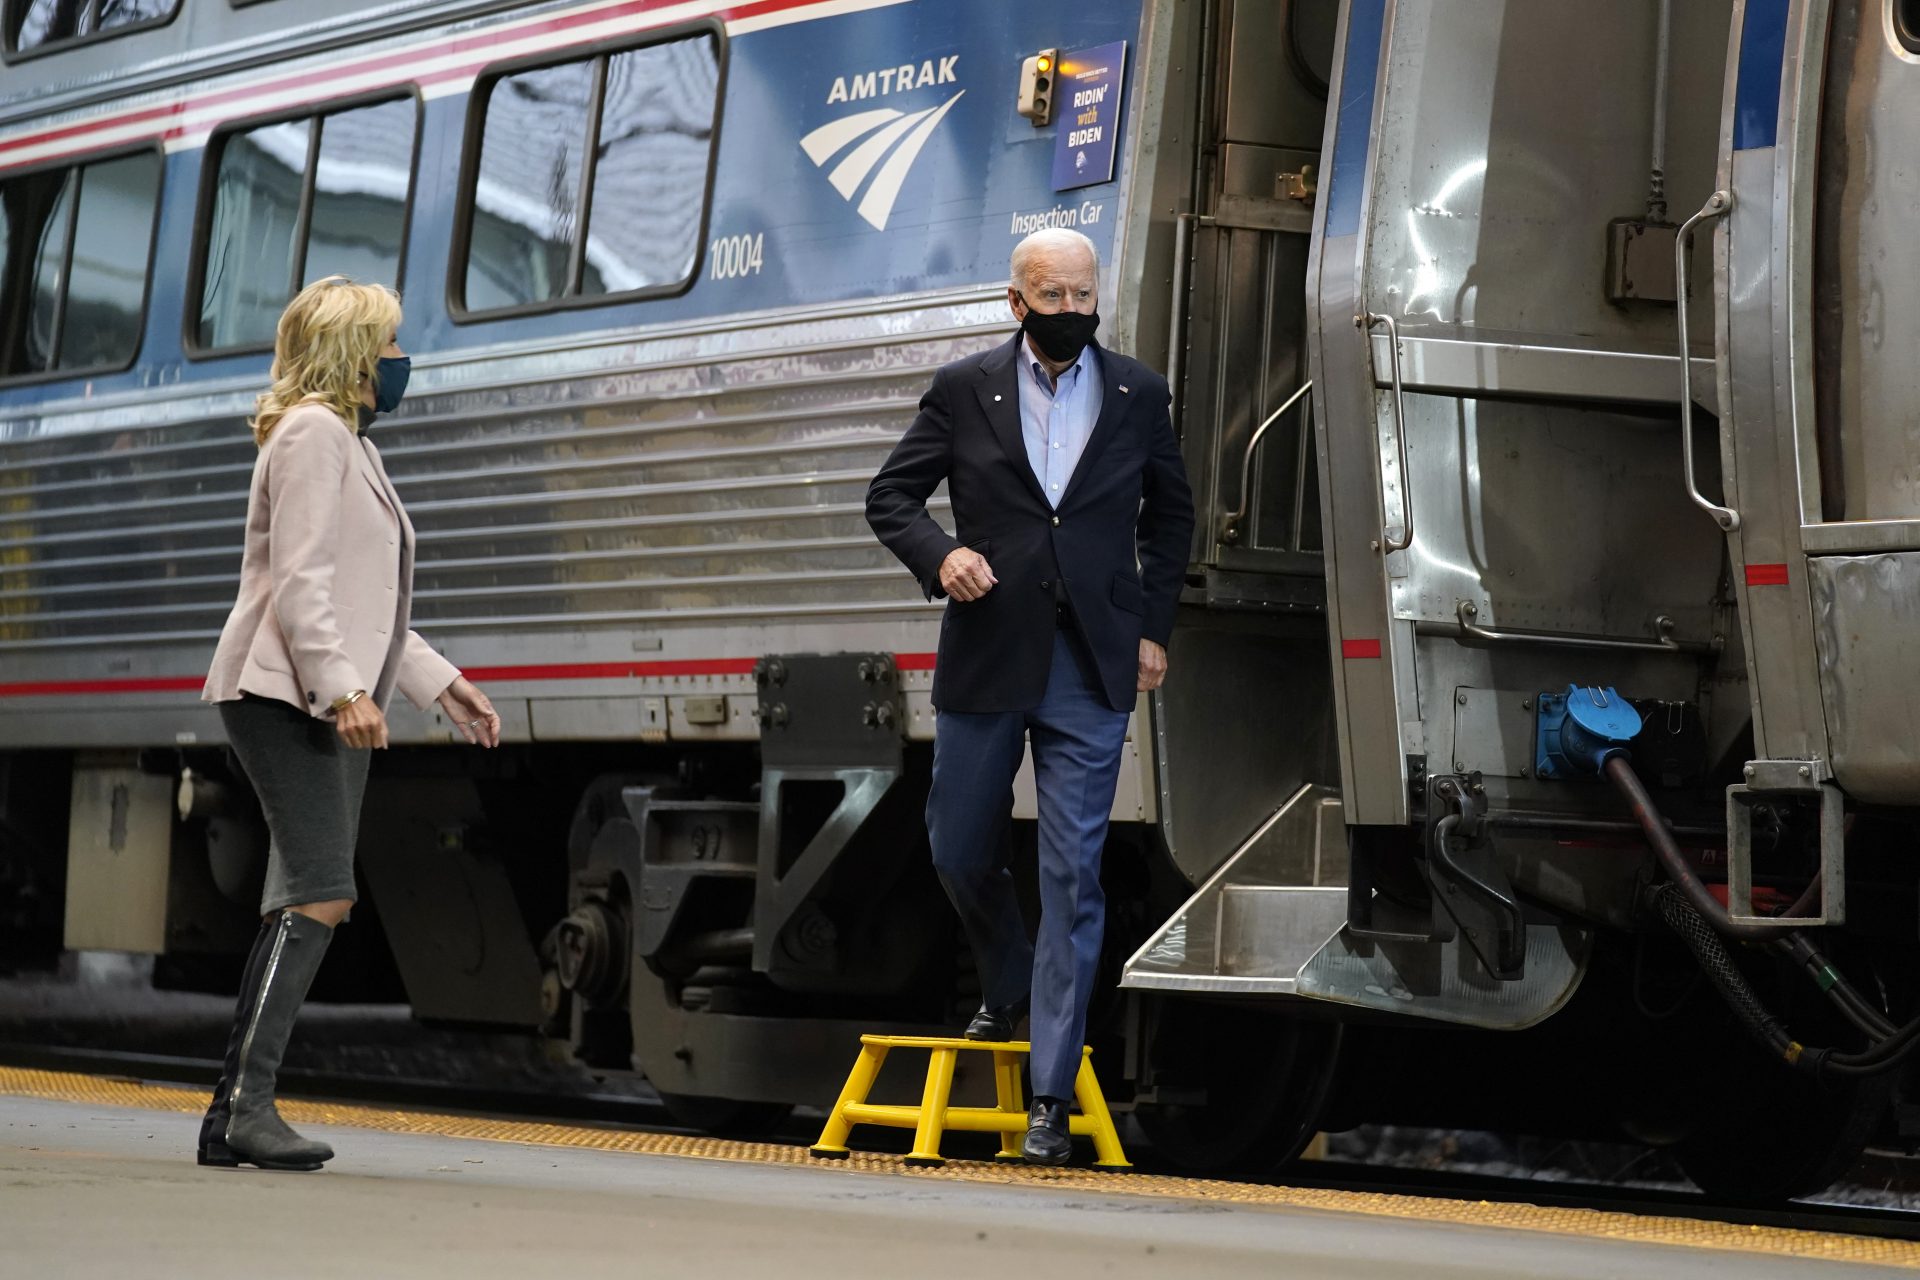 Democratic presidential candidate former Vice President Joe Biden and Jill Biden, arrive to speak at Amtrak's Pittsburgh Train Station, Wednesday, Sept. 30, 2020, in Pittsburgh. Biden is on a train tour through Ohio and Pennsylvania today.